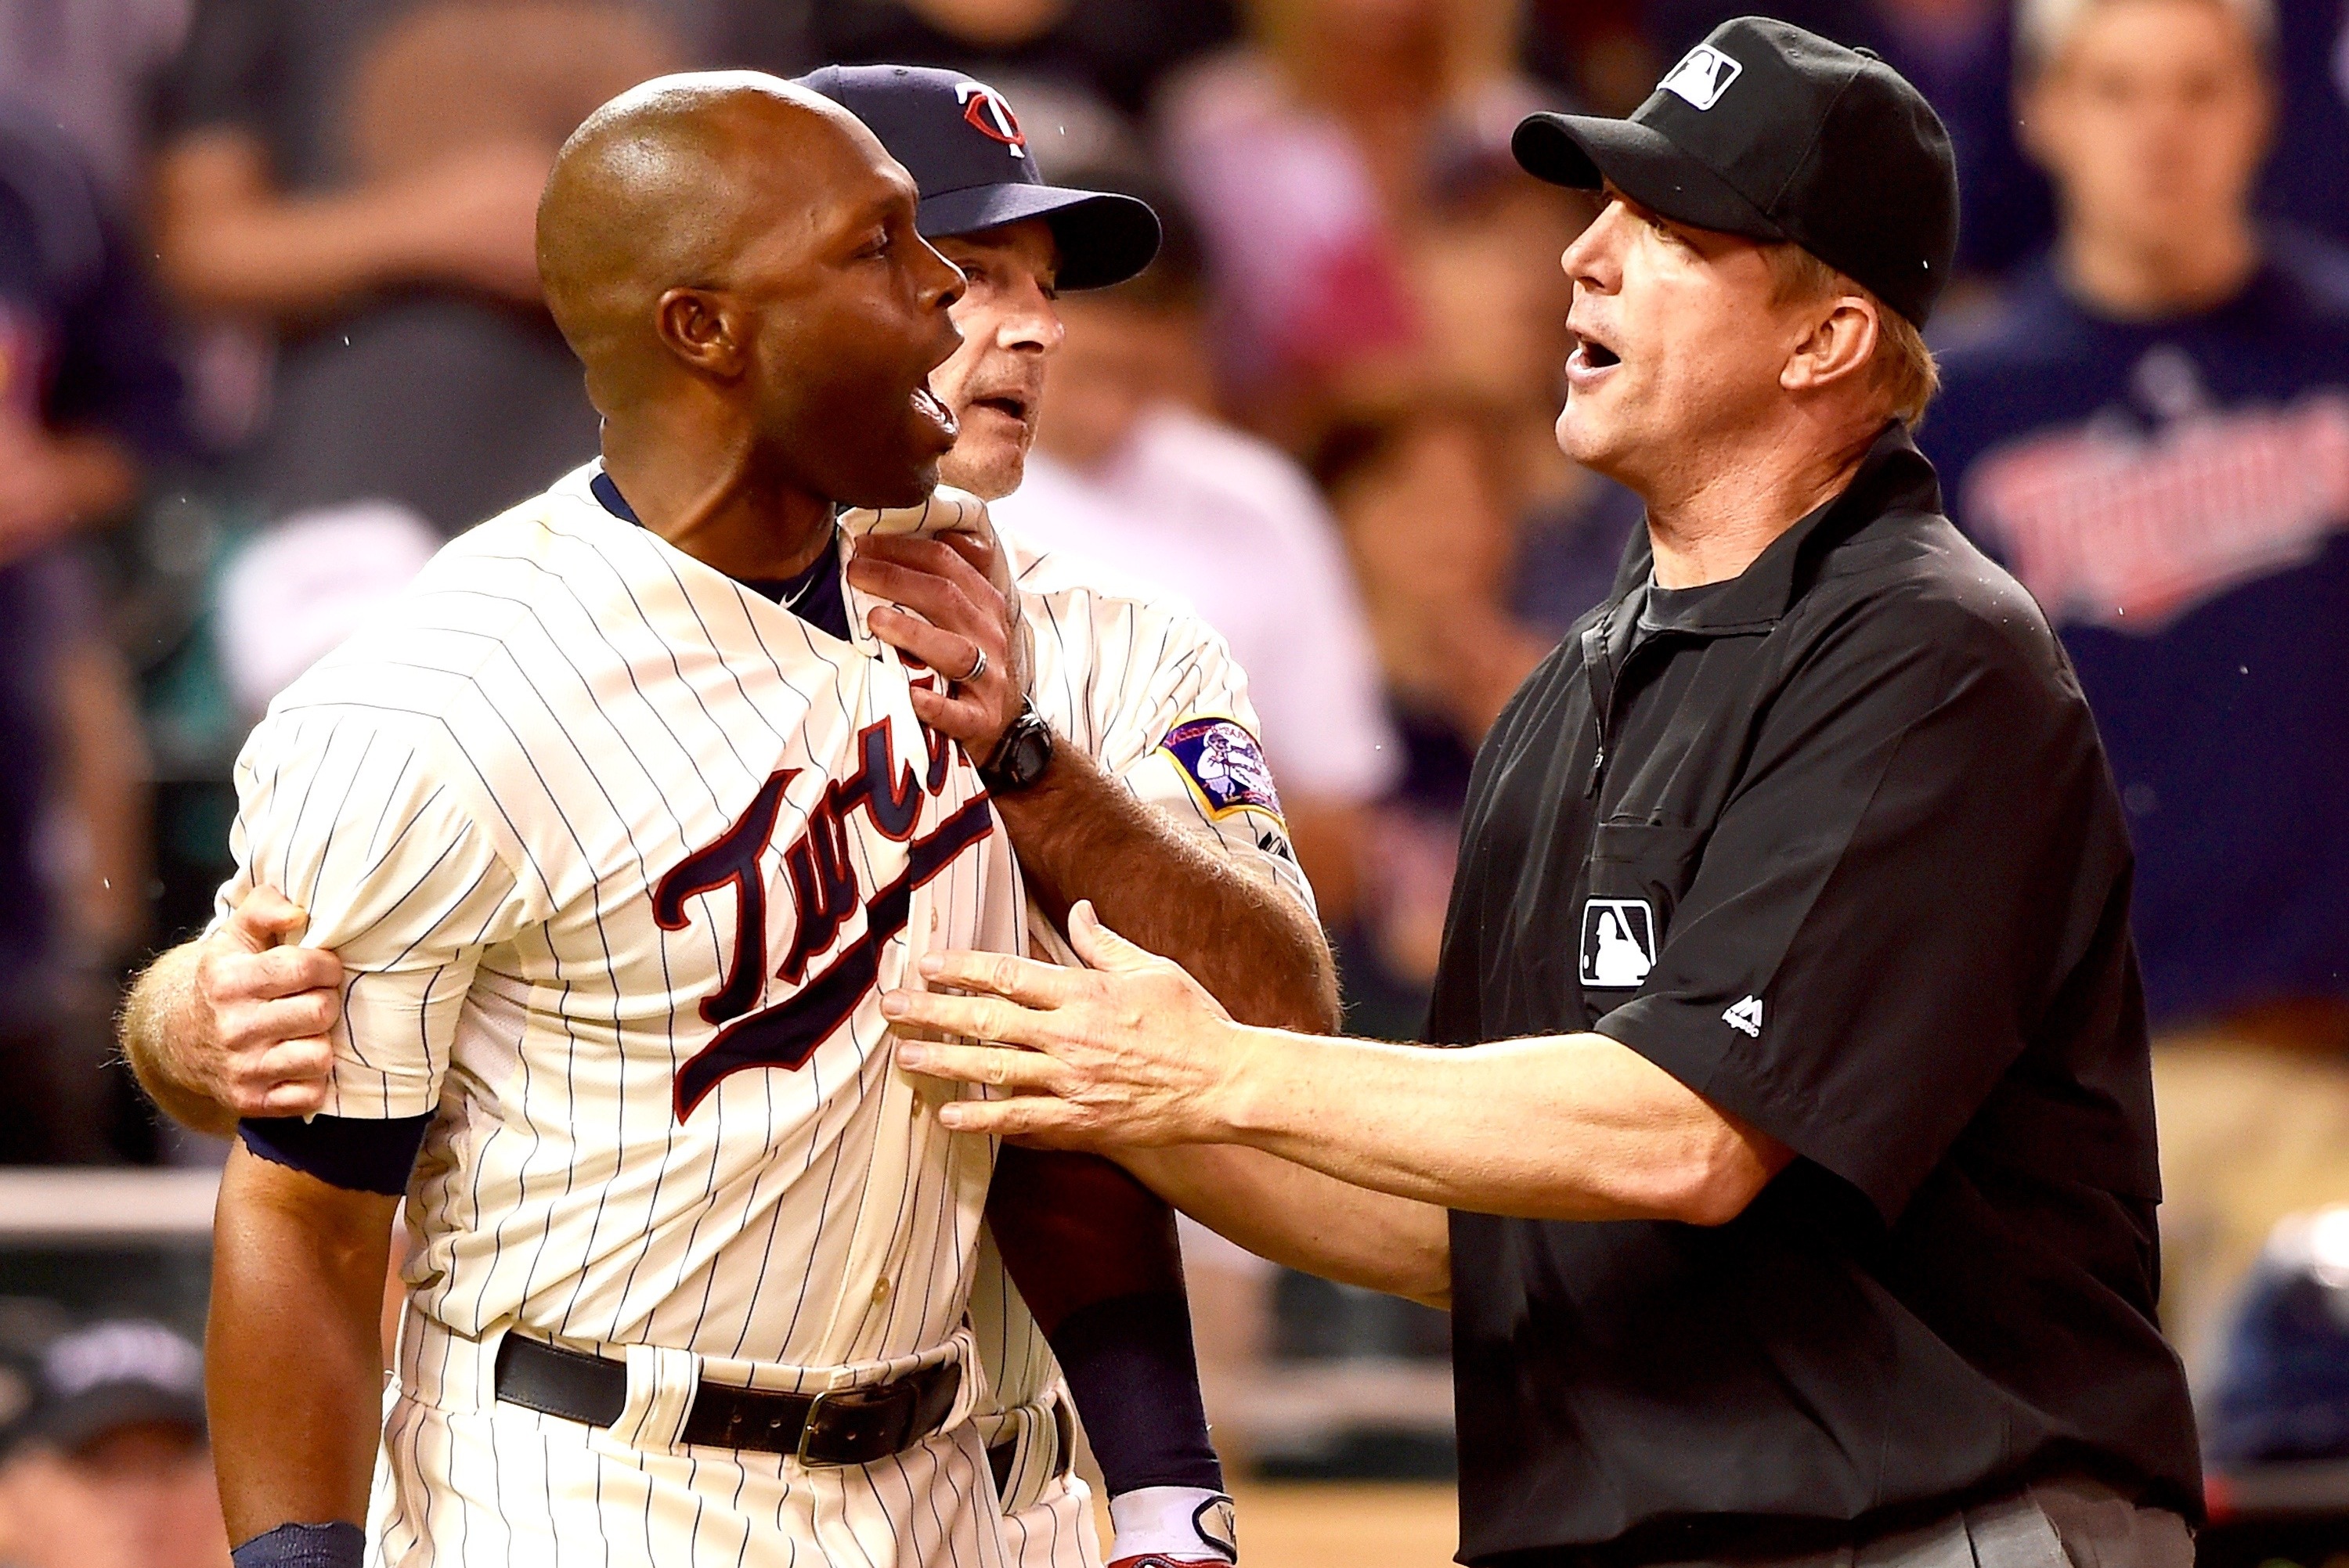 Tigers' Torii Hunter mulling retirement after abrupt end to playoff run –  Macomb Daily